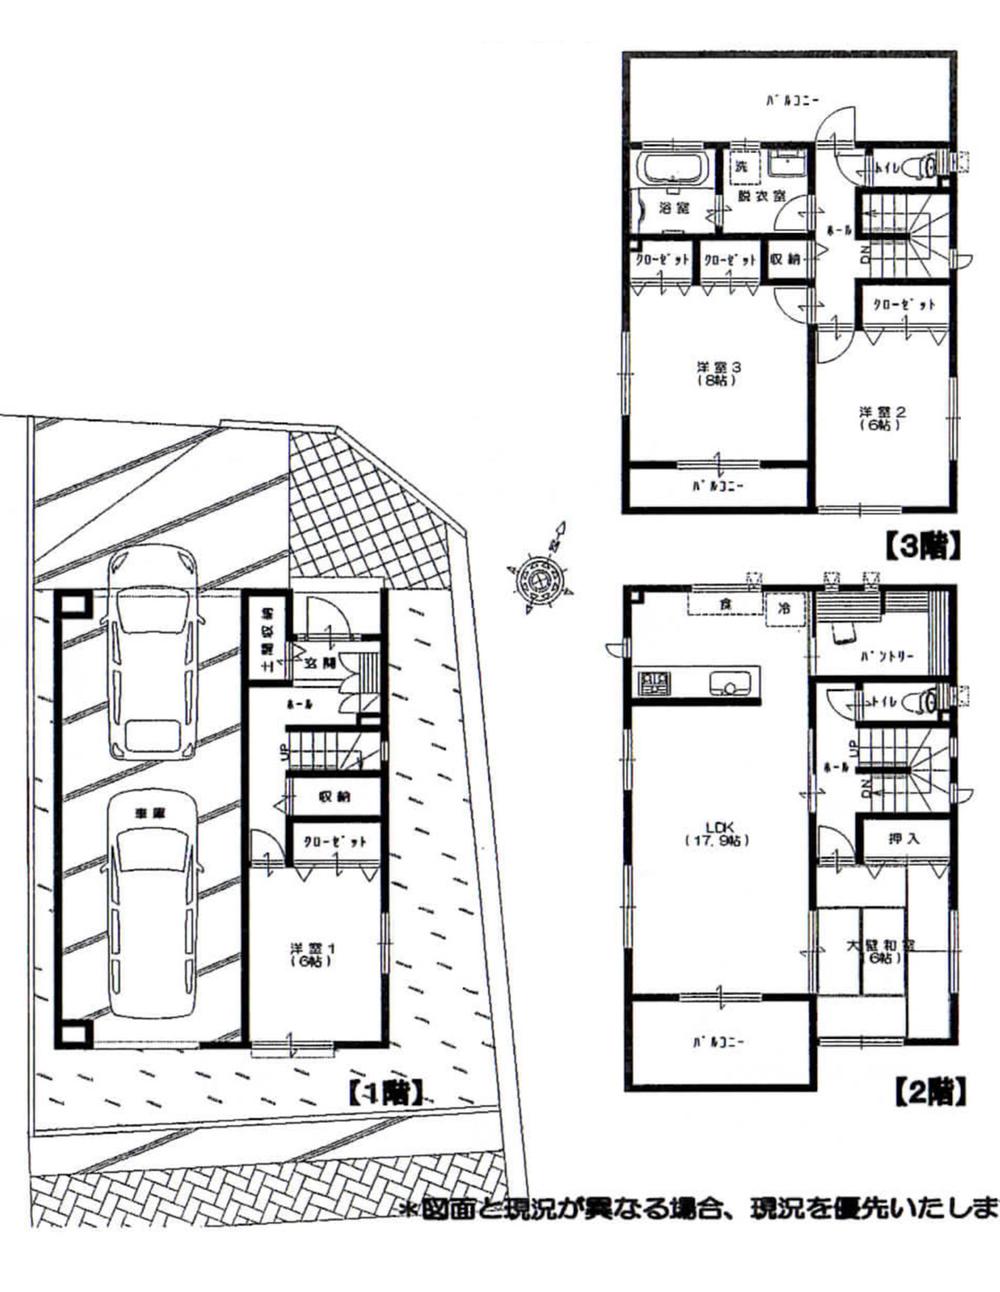 Floor plan. 29,800,000 yen, 4LDK, Land area 119.31 sq m , The building area of ​​121.44 sq m currently can be your favorite color select for the vacant lot. Three-story happy but jammed 4LDK!